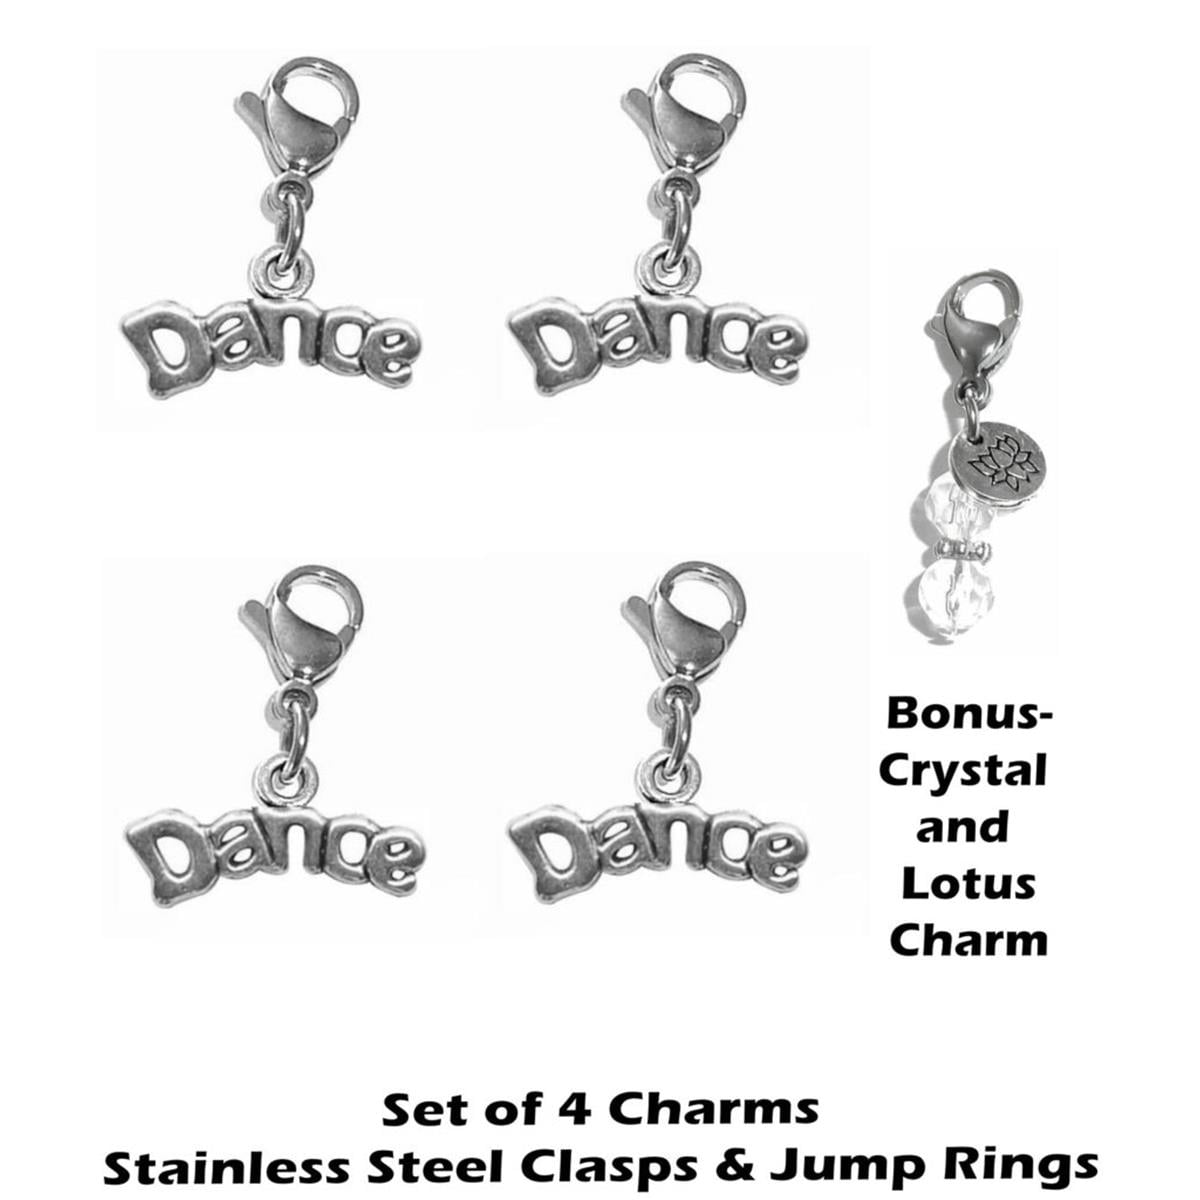 Animal Charms Clip On To Anything Perfect For Charm Bracelets And  Necklaces, Bag Or Purse Charms, Backpacks, Zipper Pulls - Multipack Horse  Charms